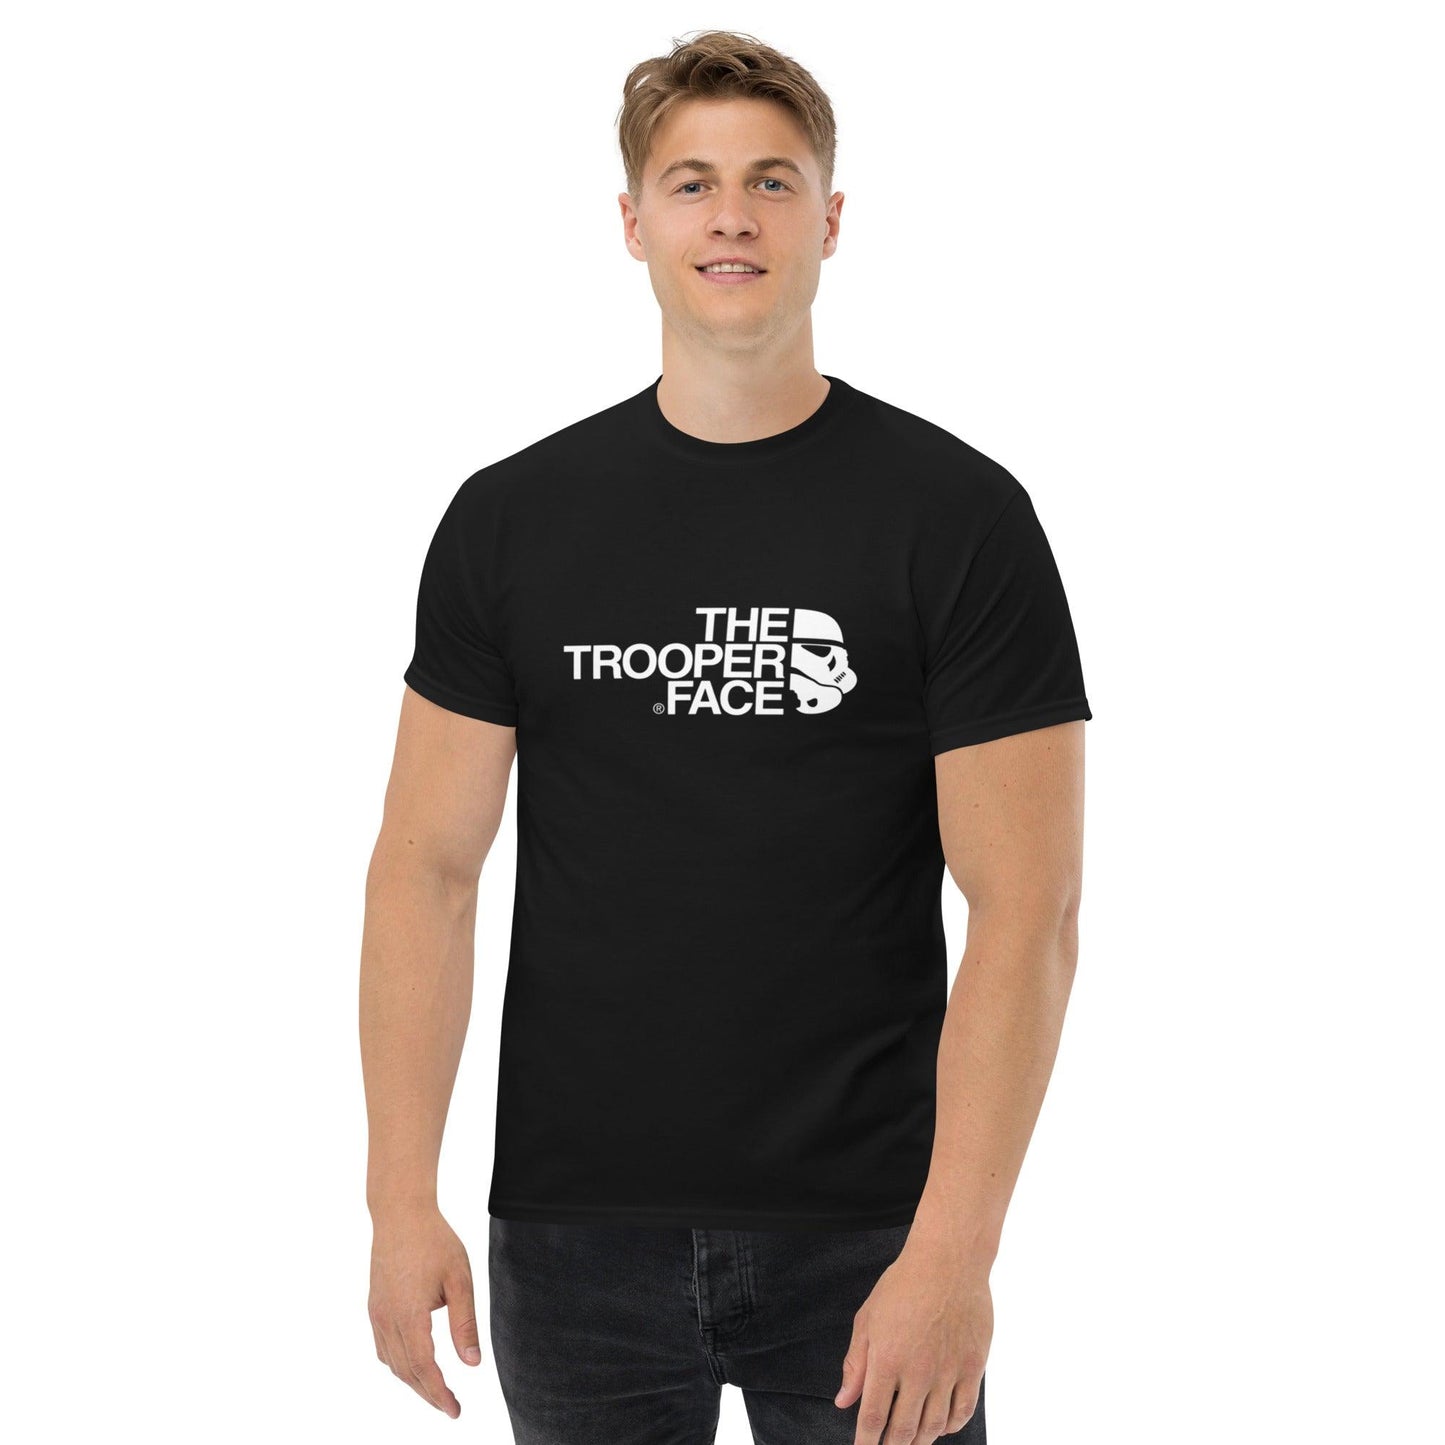 THE TROOPER FACE - Anarchyca-clothing